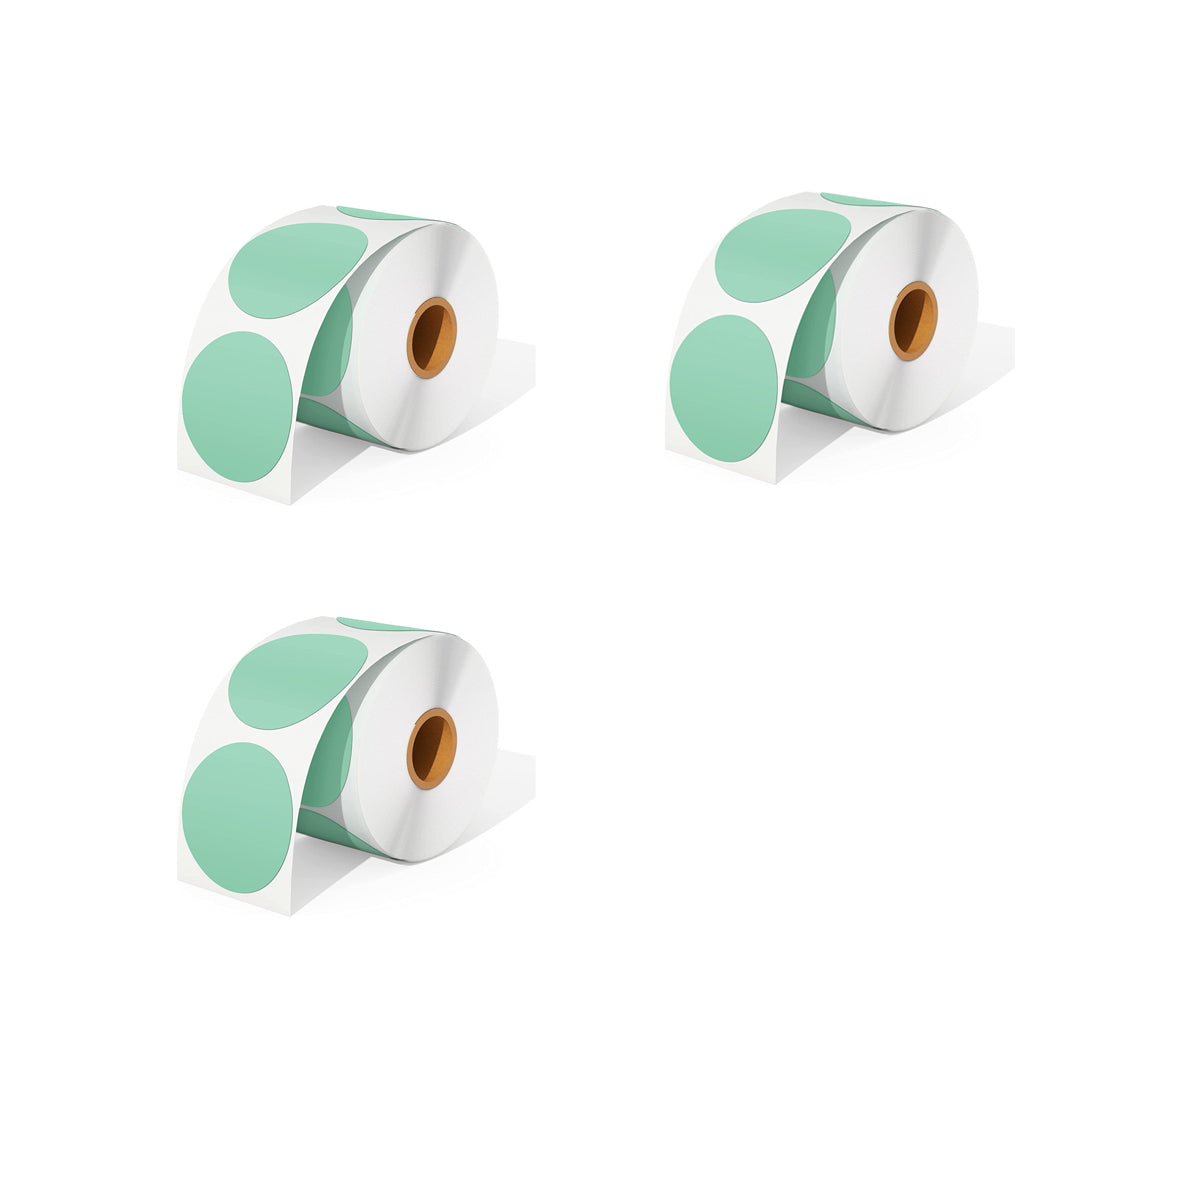 We offer three rolls of green direct thermal round labels as a kit, with 750 labels per roll.